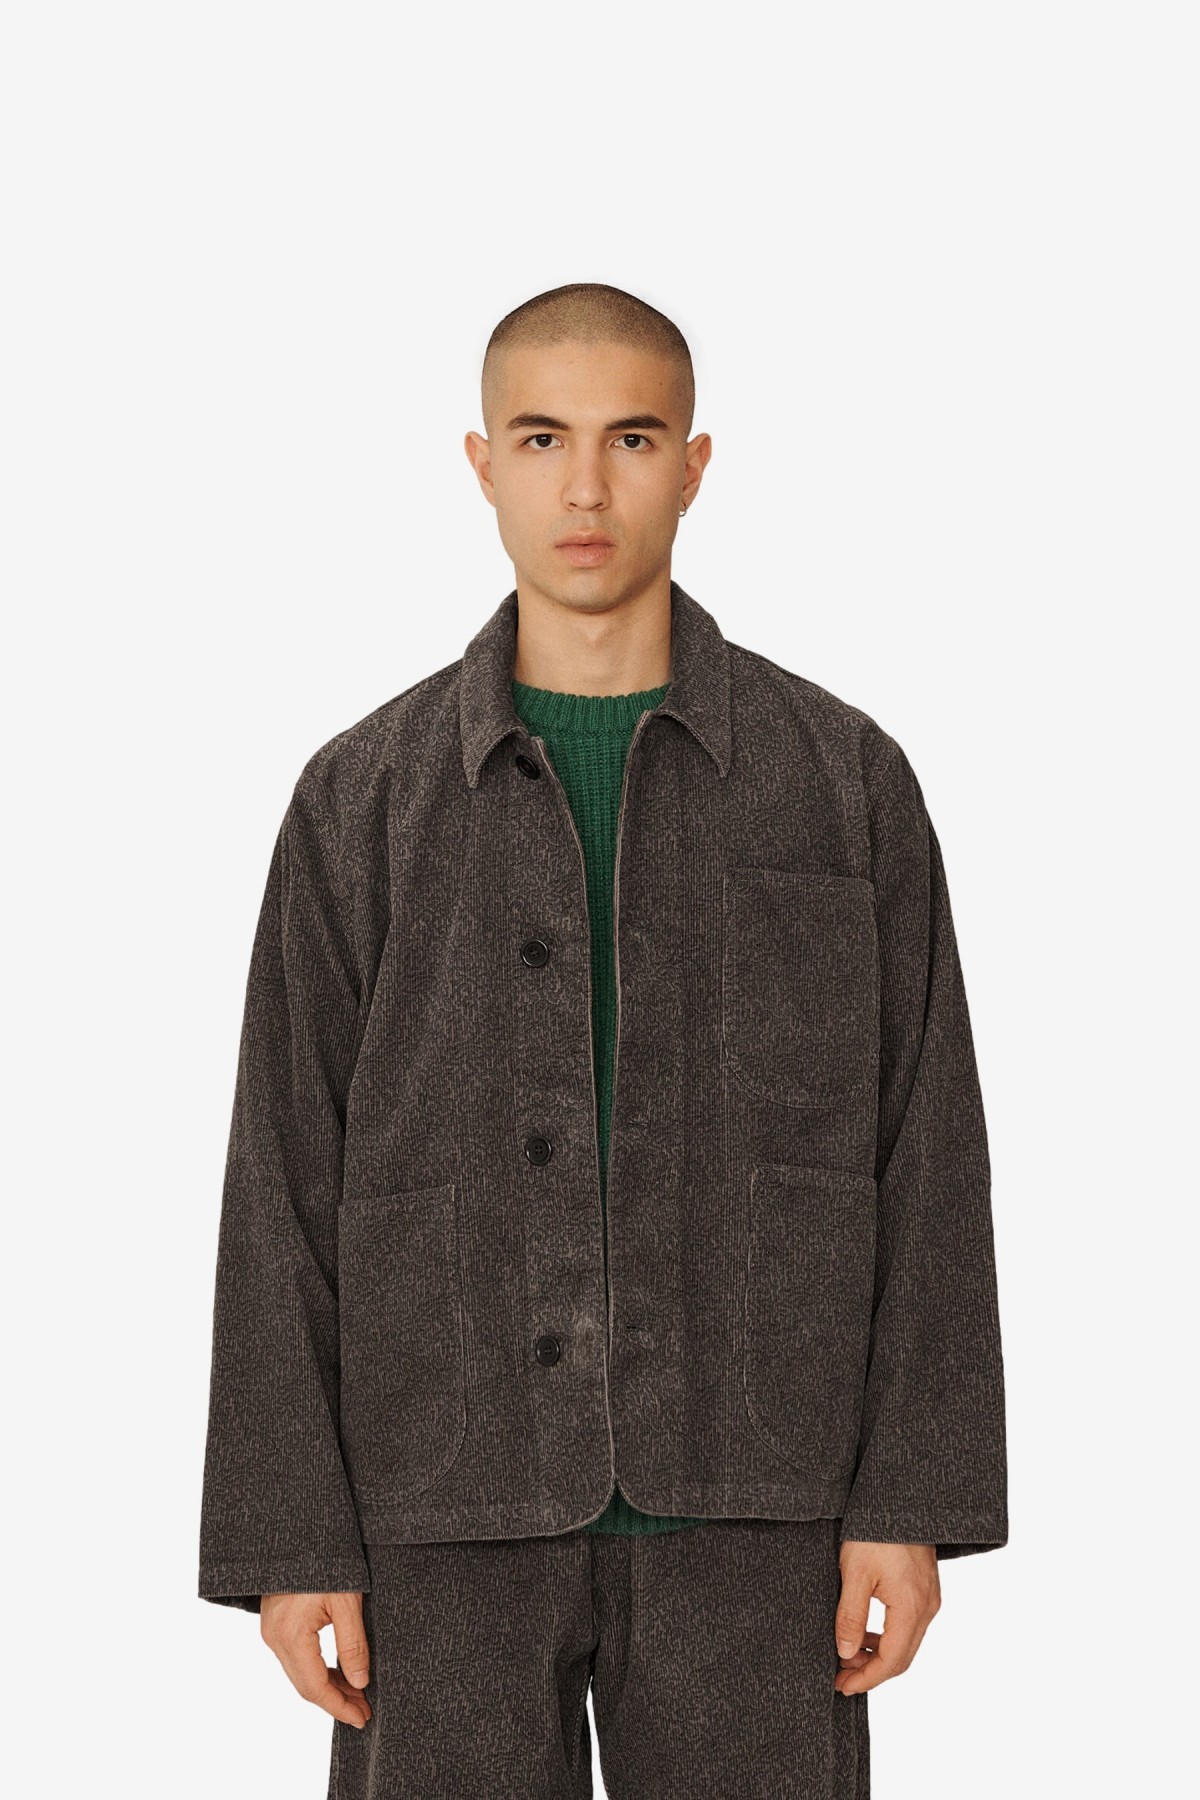 YMC You Must Create Labour Chore Jacket in Grey